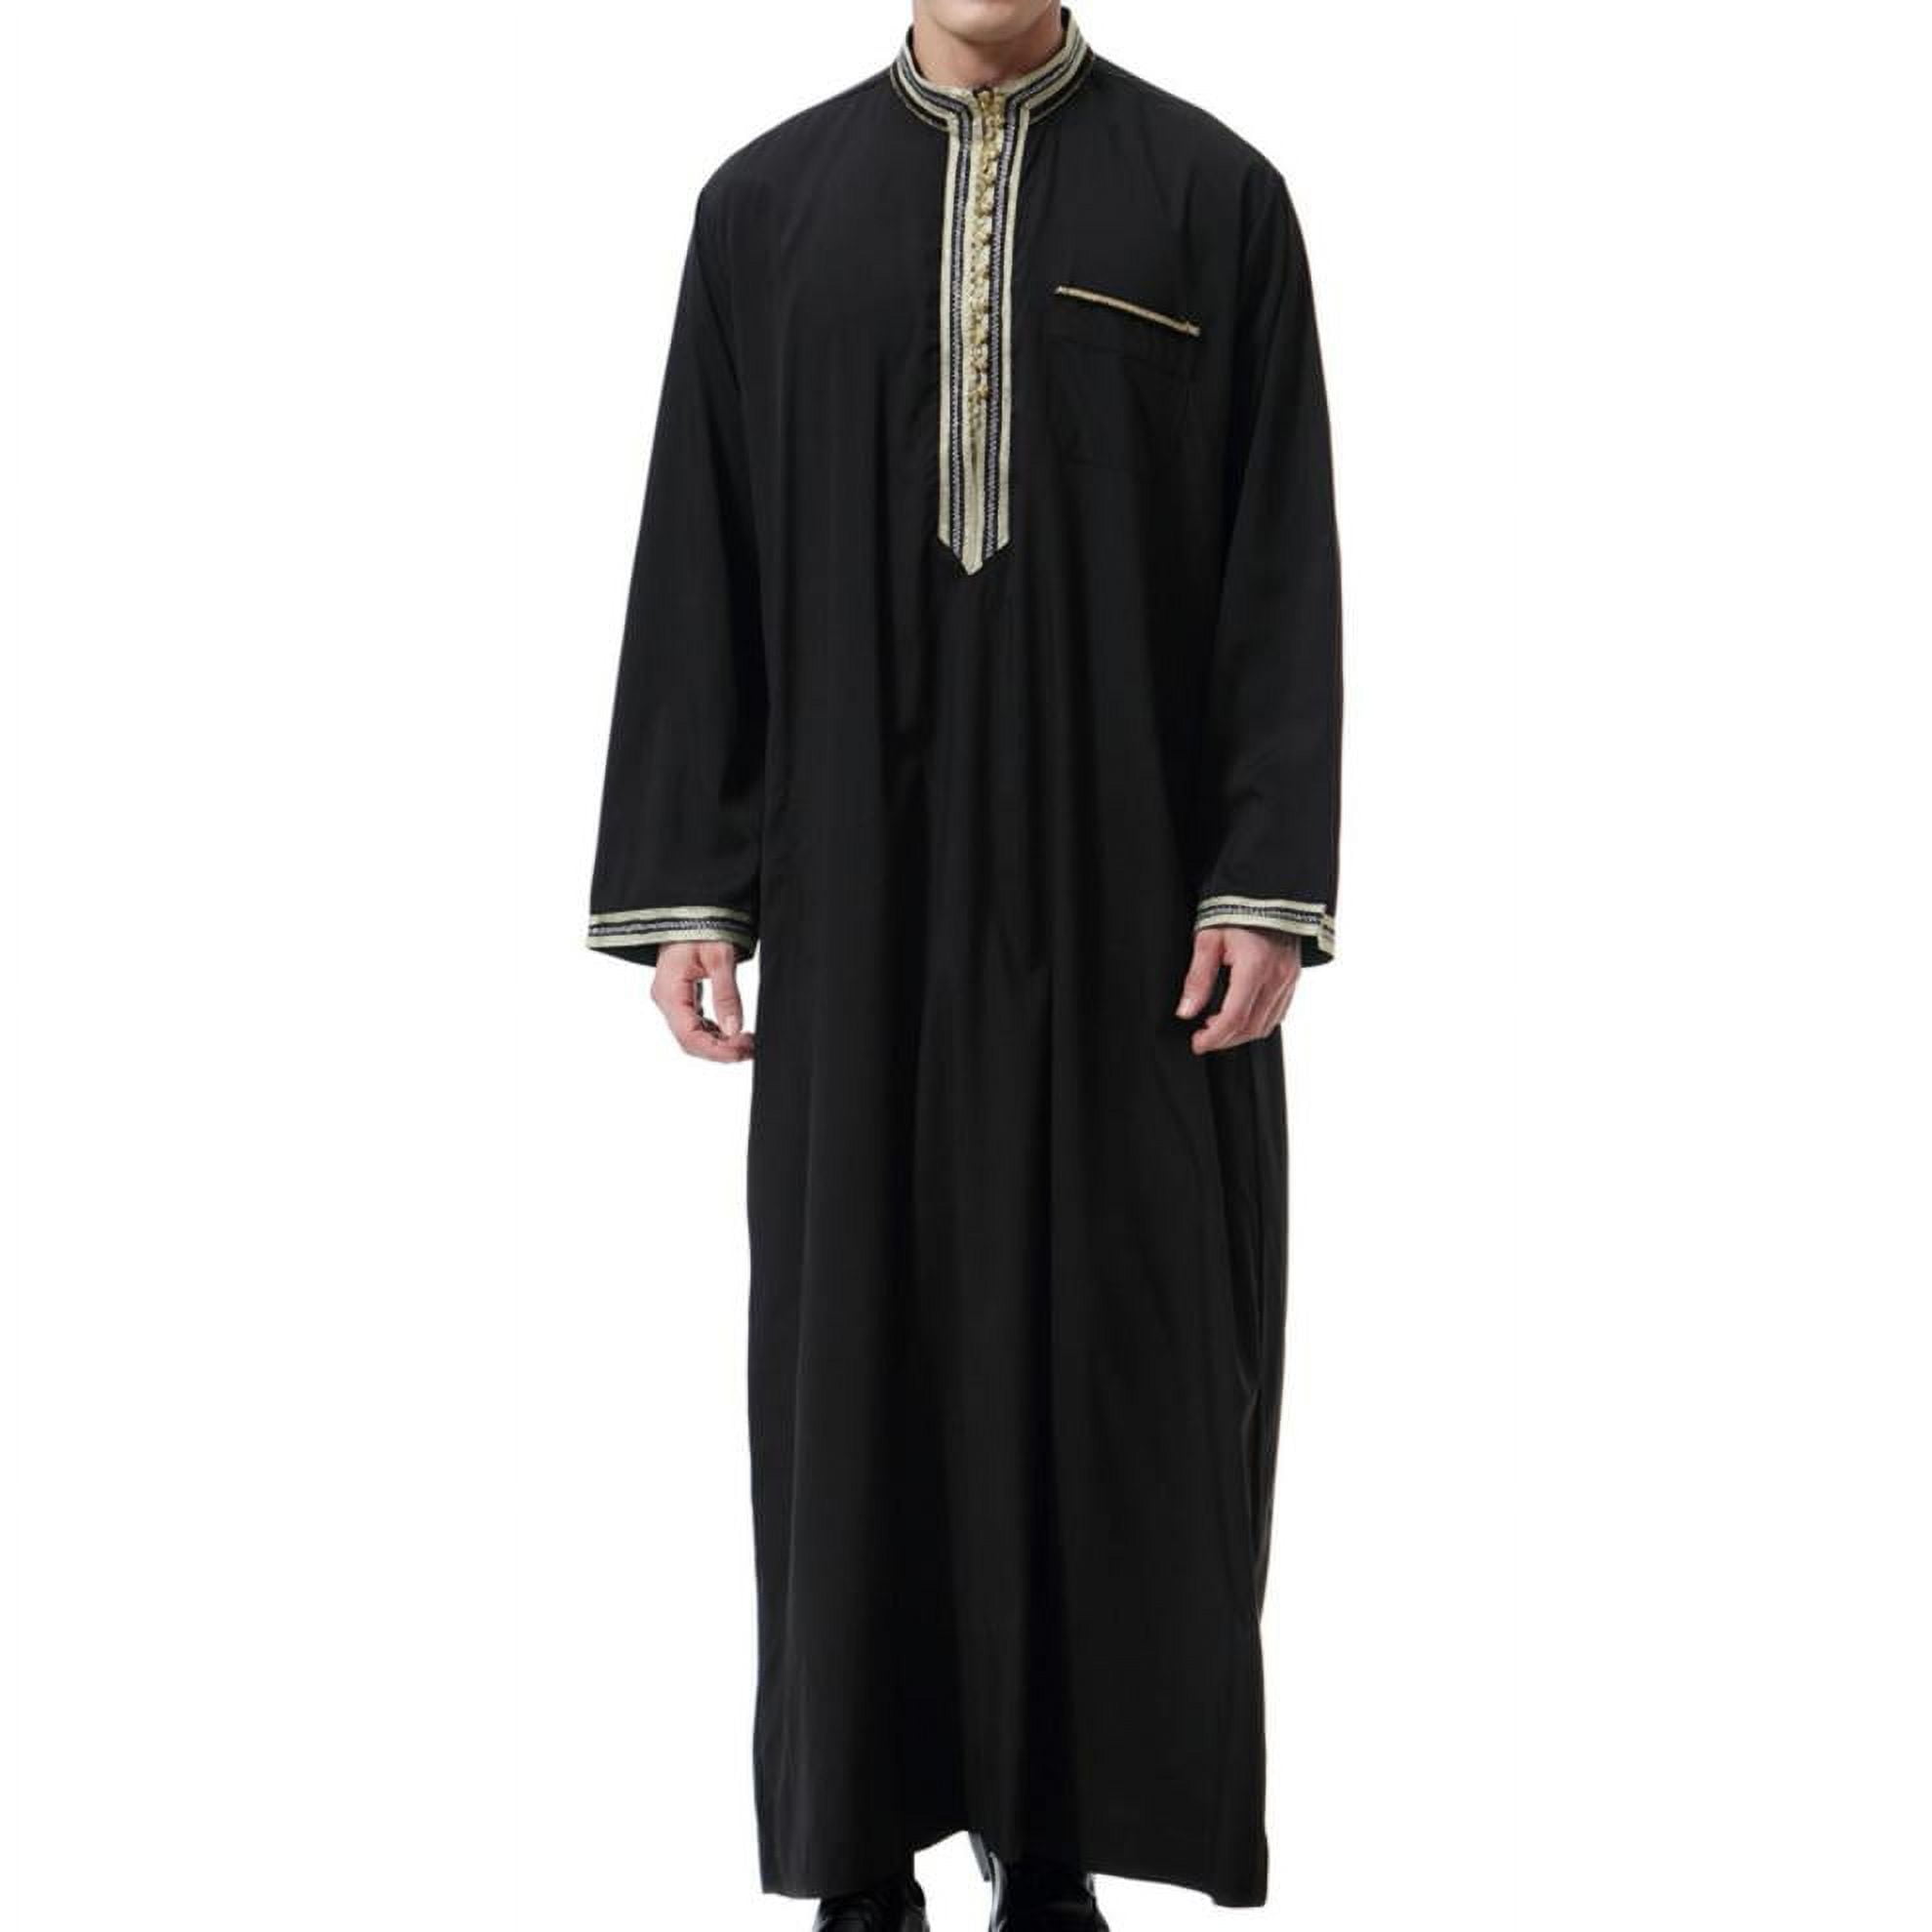 SDNall Muslim Clothes for Men Muslim Robe Arab Middle Robe Long Style ...